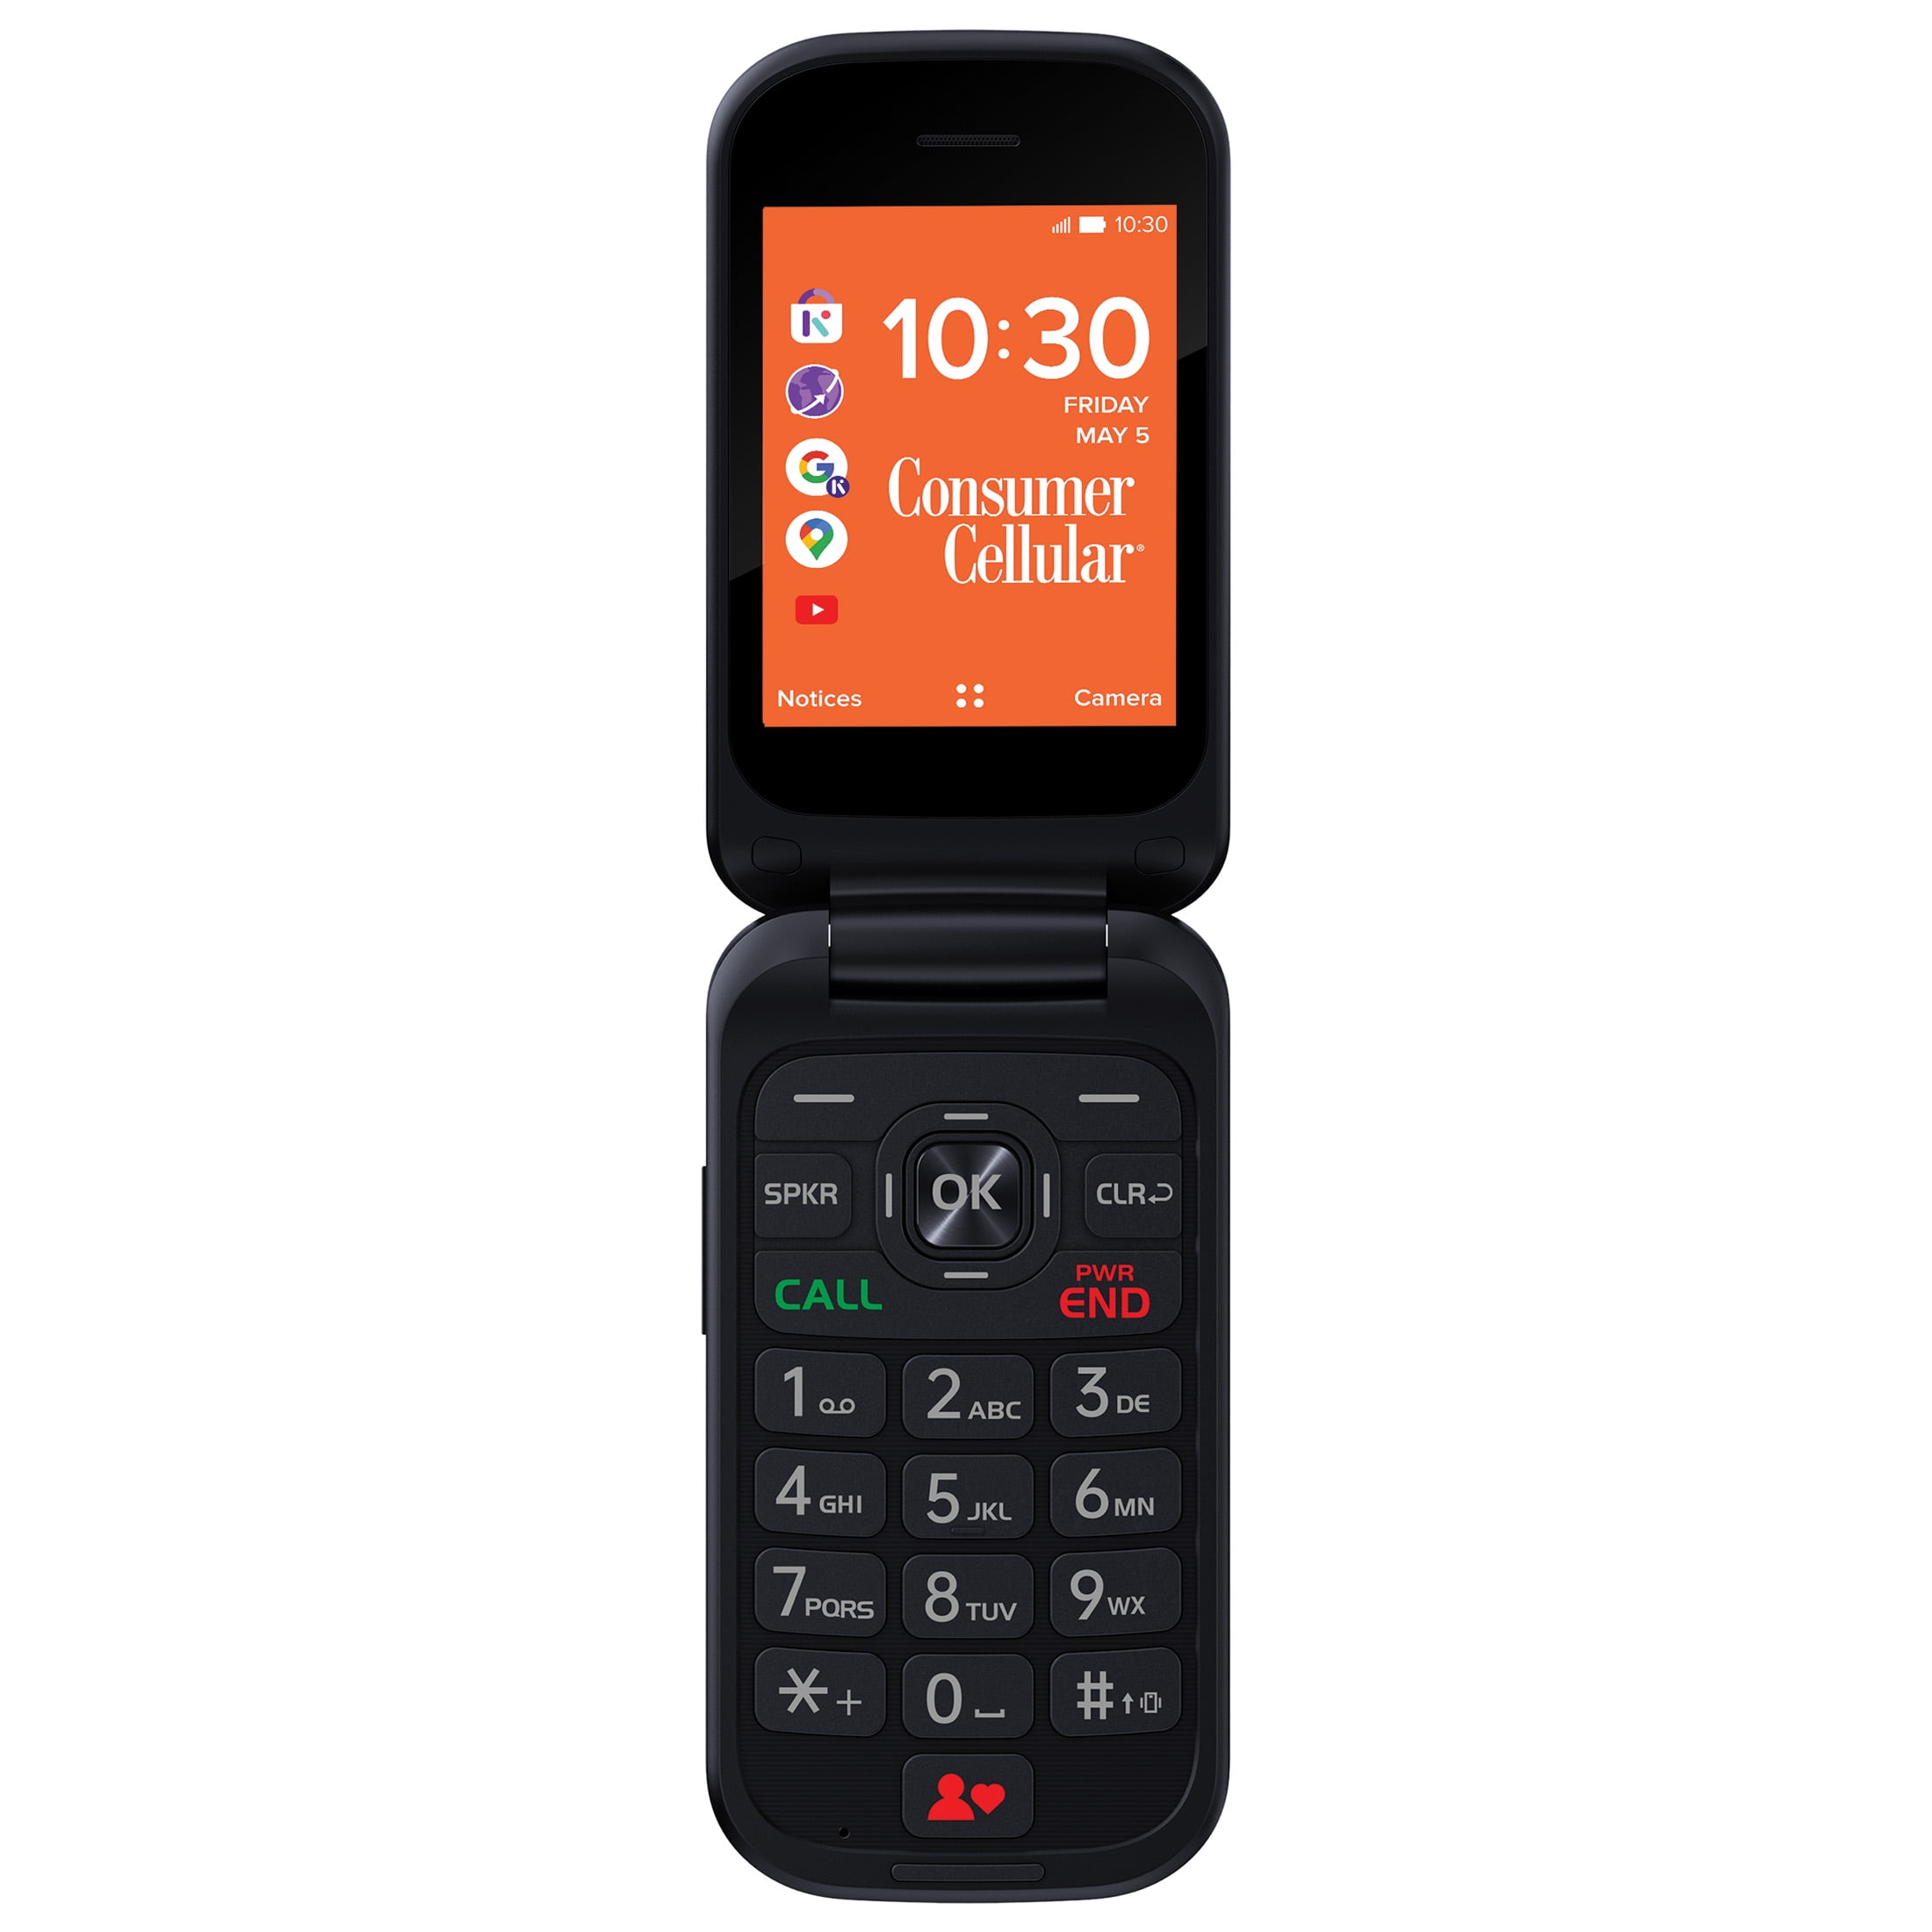 Consumer Cellular Cell Phones & Plans